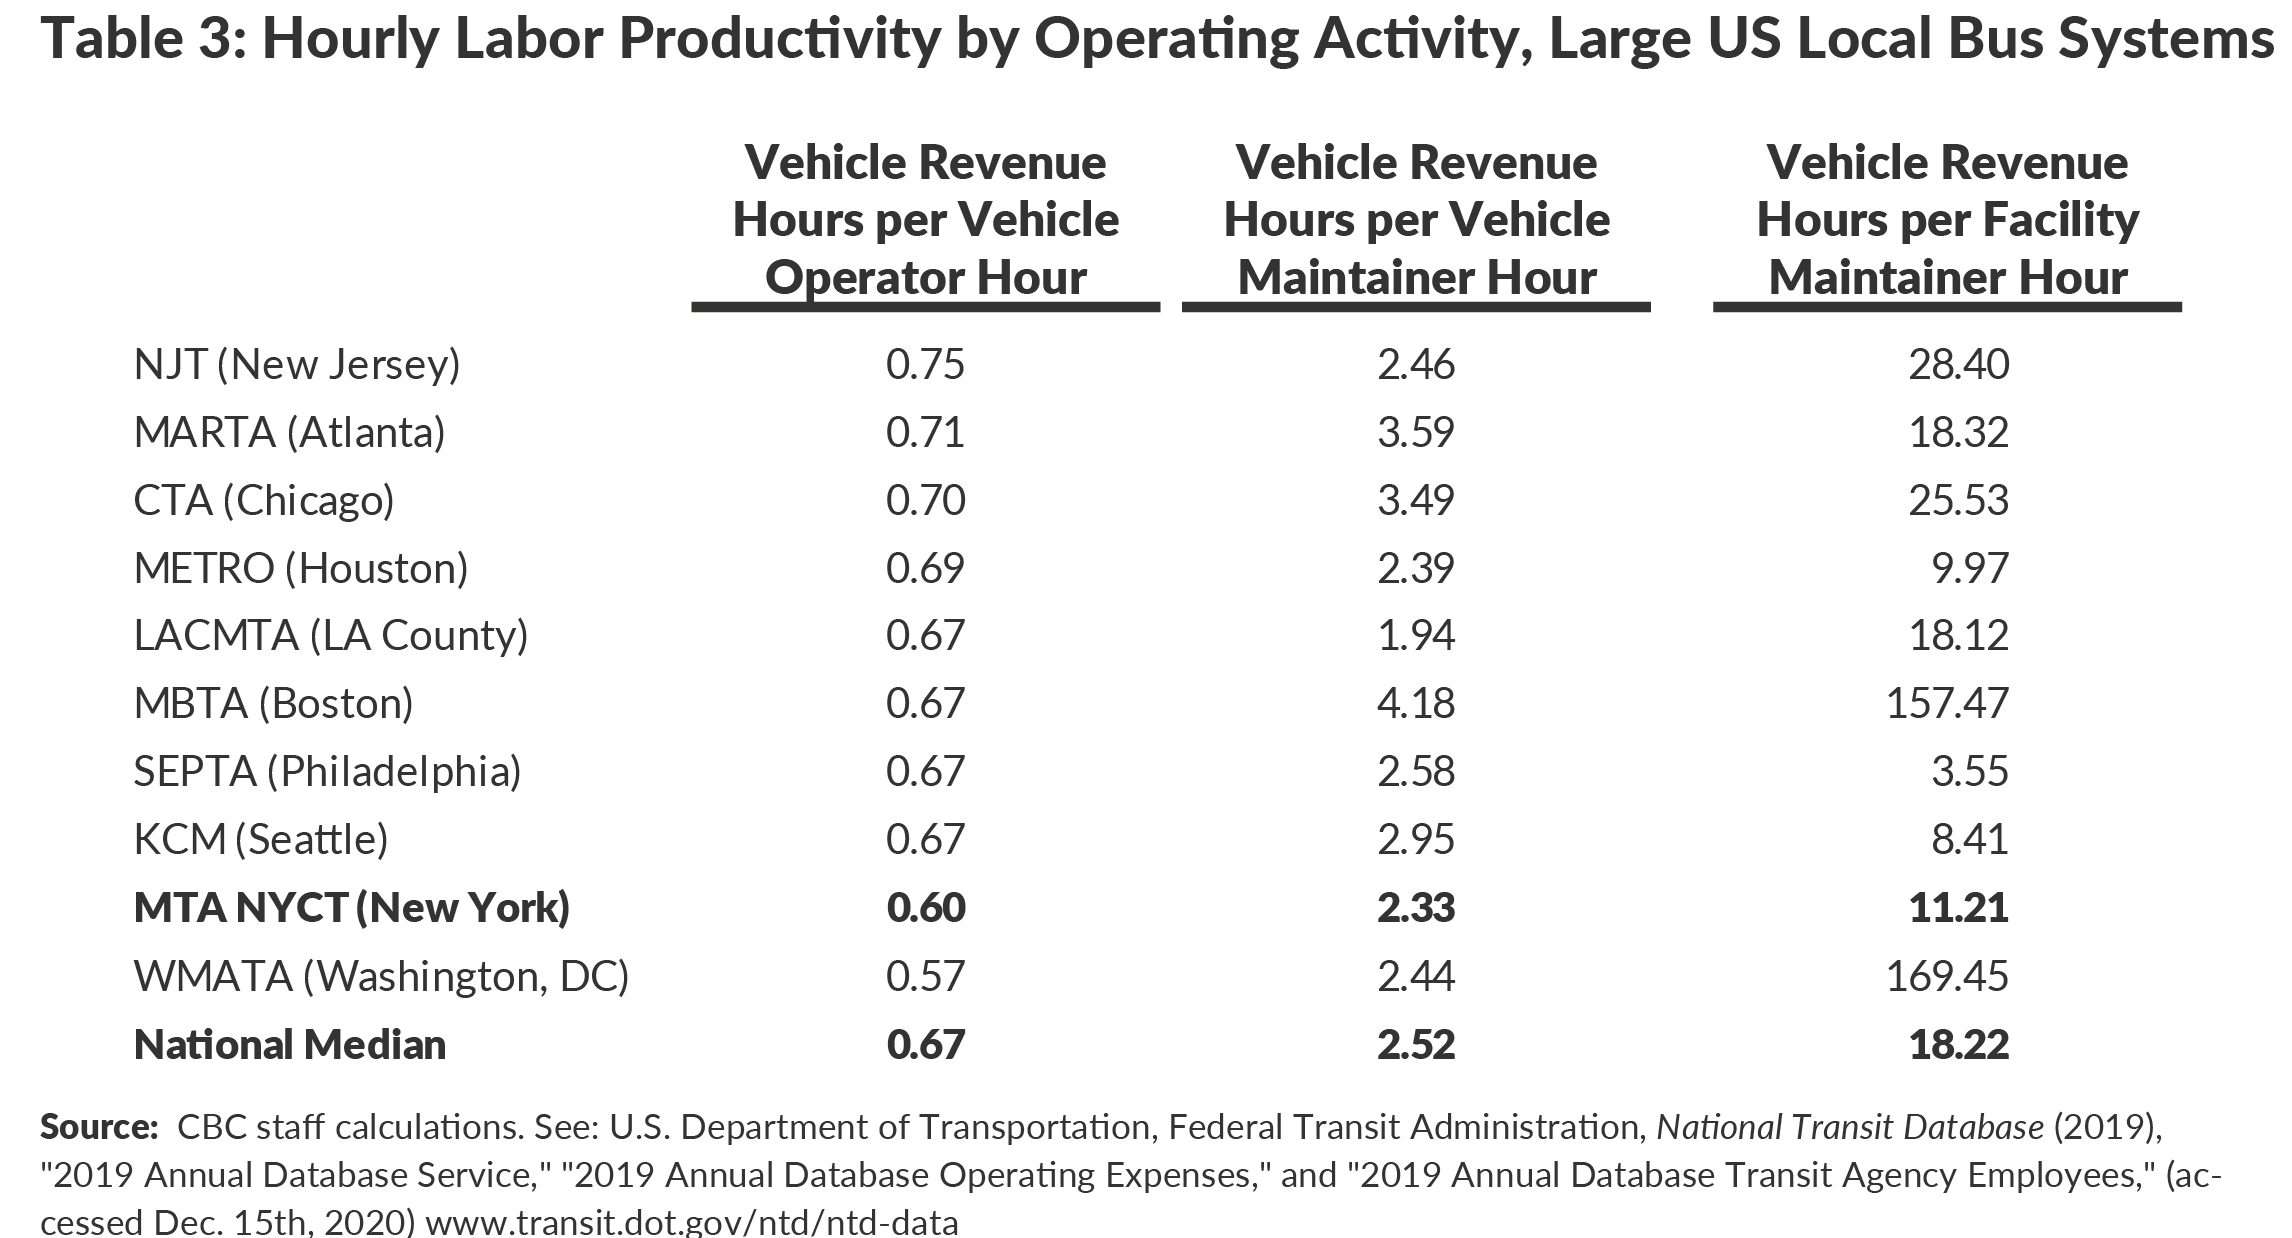 Table 3: Hourly Labor Productivity by Operating Activity, Large US Local Bus Systems